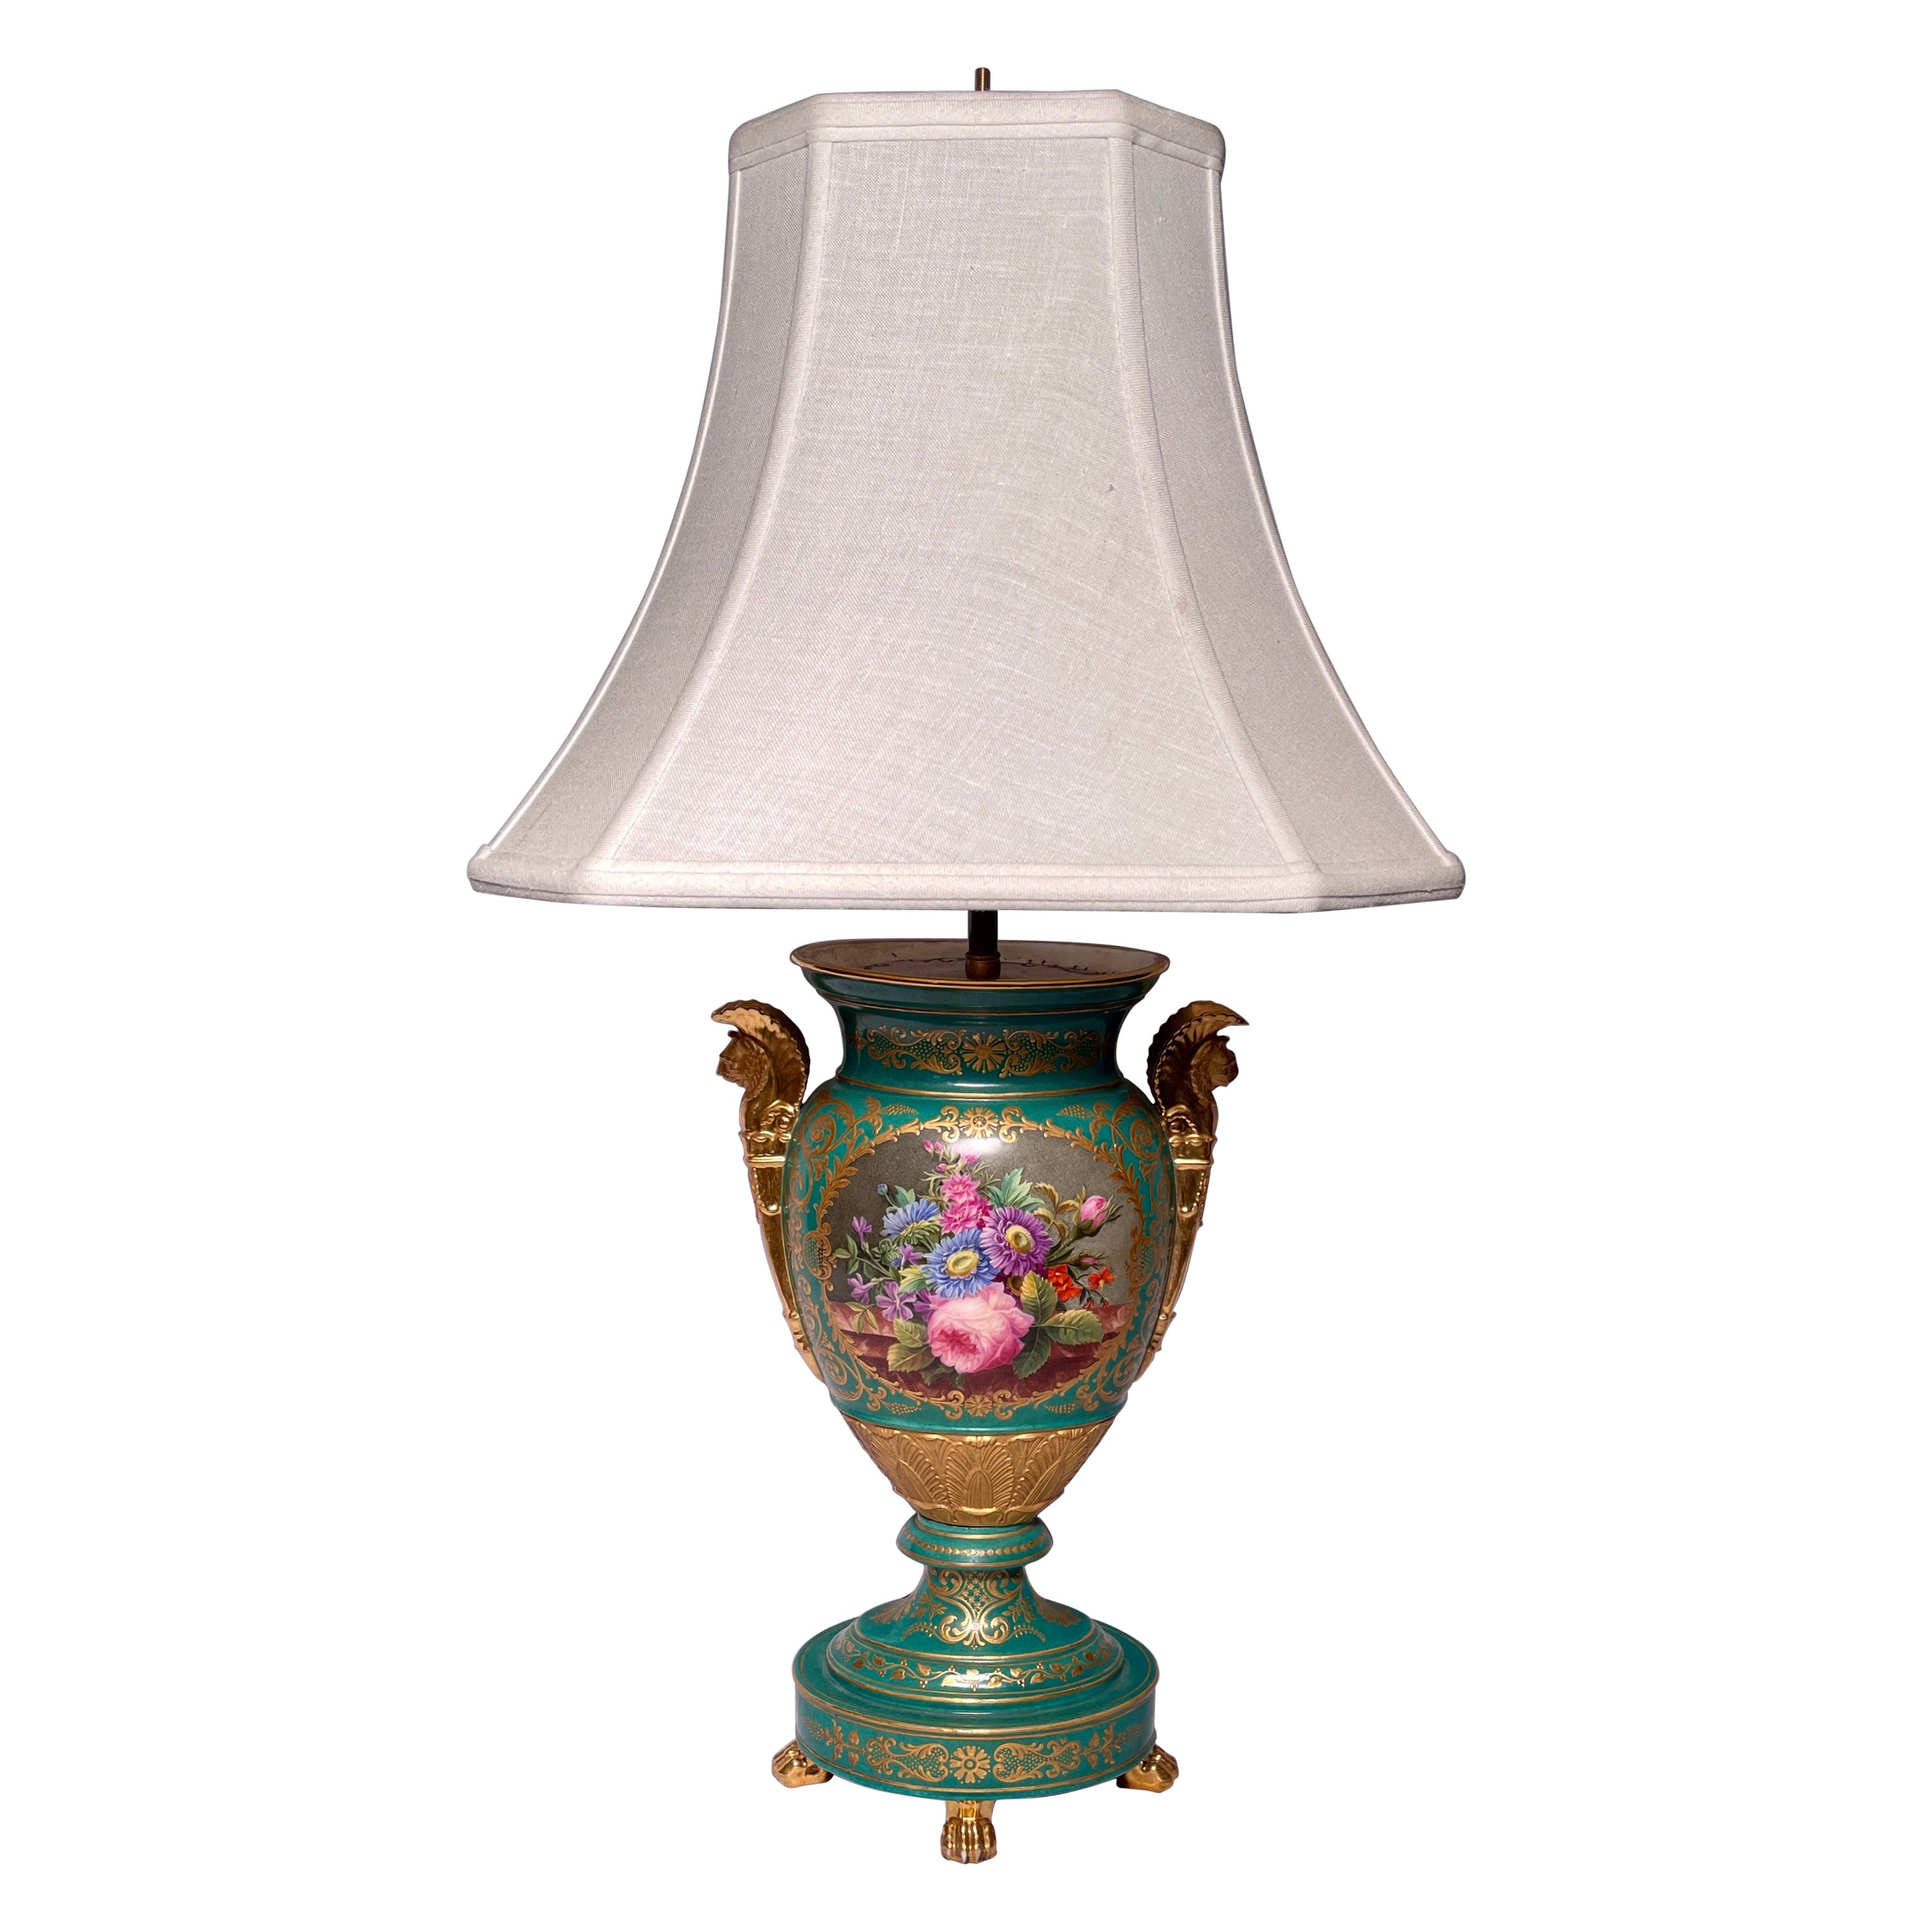 Antique 19th Century French Green and Gold Painted Porcelain Lamp, Circa 1860 For Sale